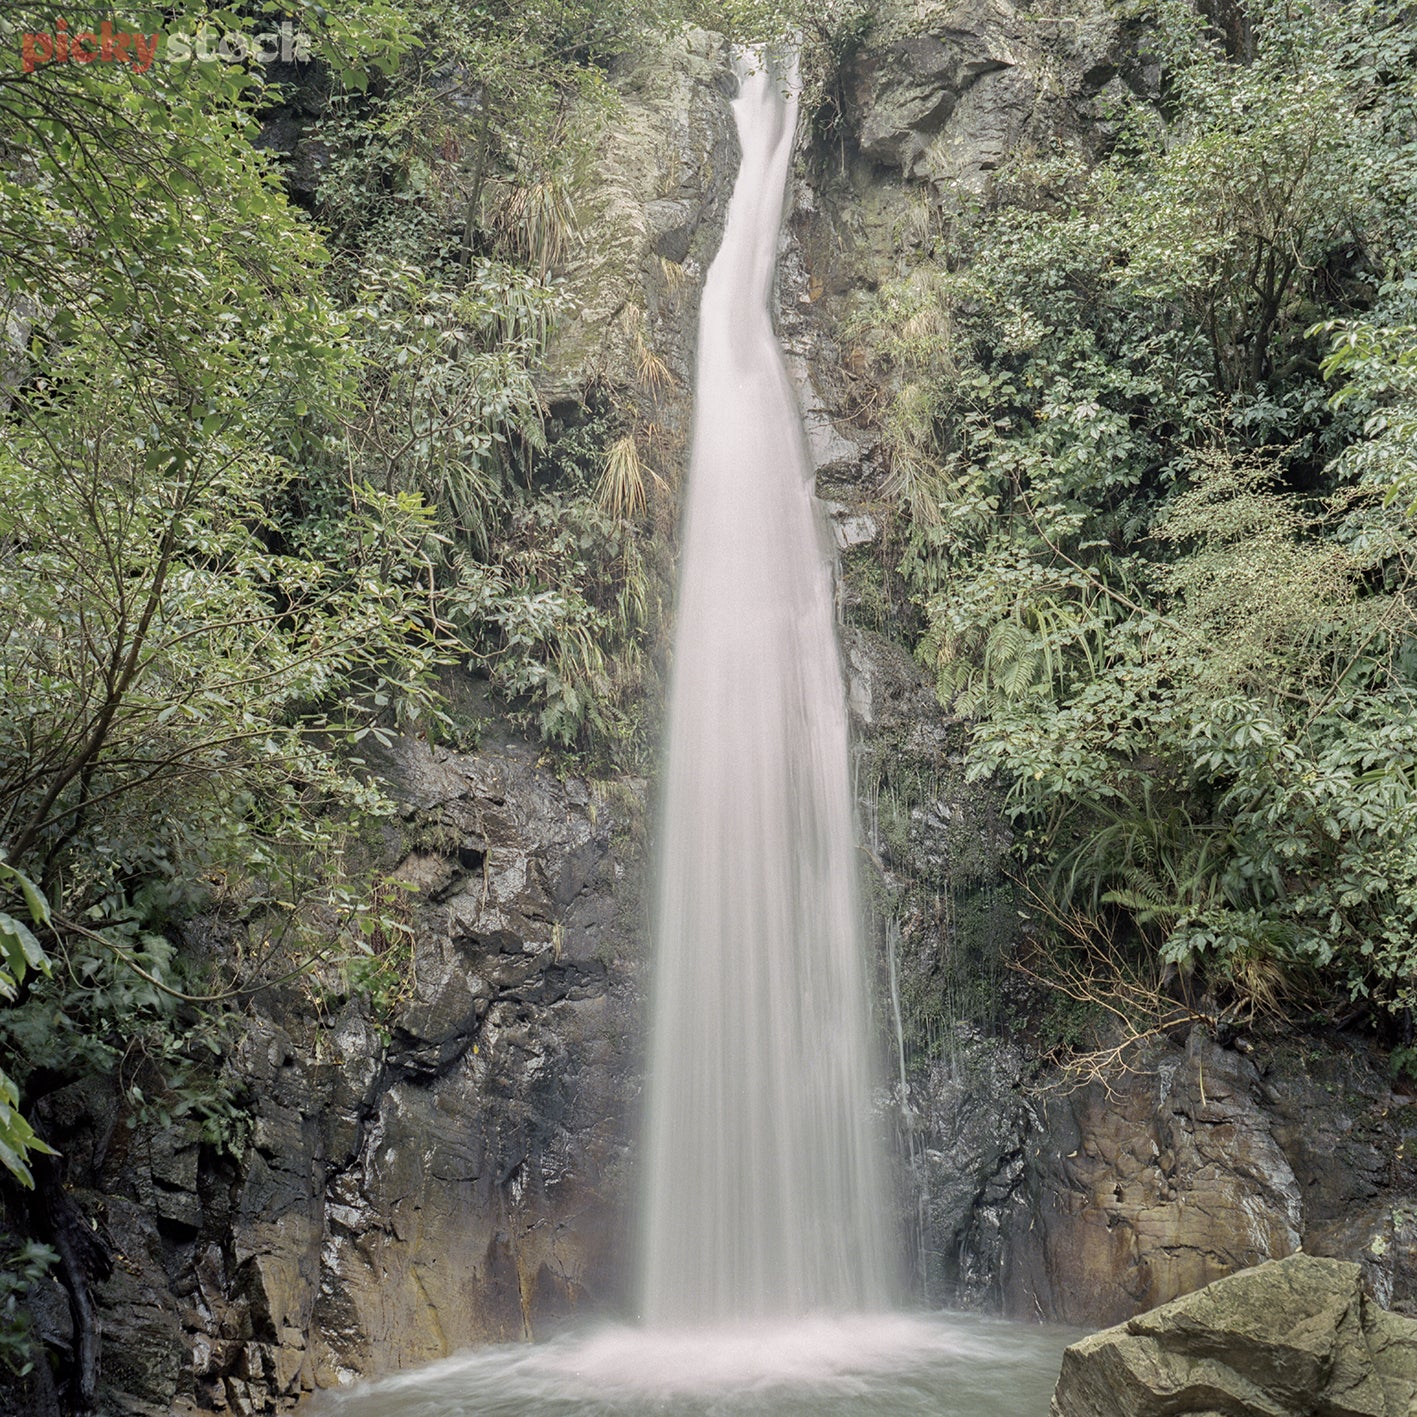 Portrait image of Waspen Waterfall. Large volume of water falling directly in the middle of the image dropping from the top of frame. Bush and greenery 